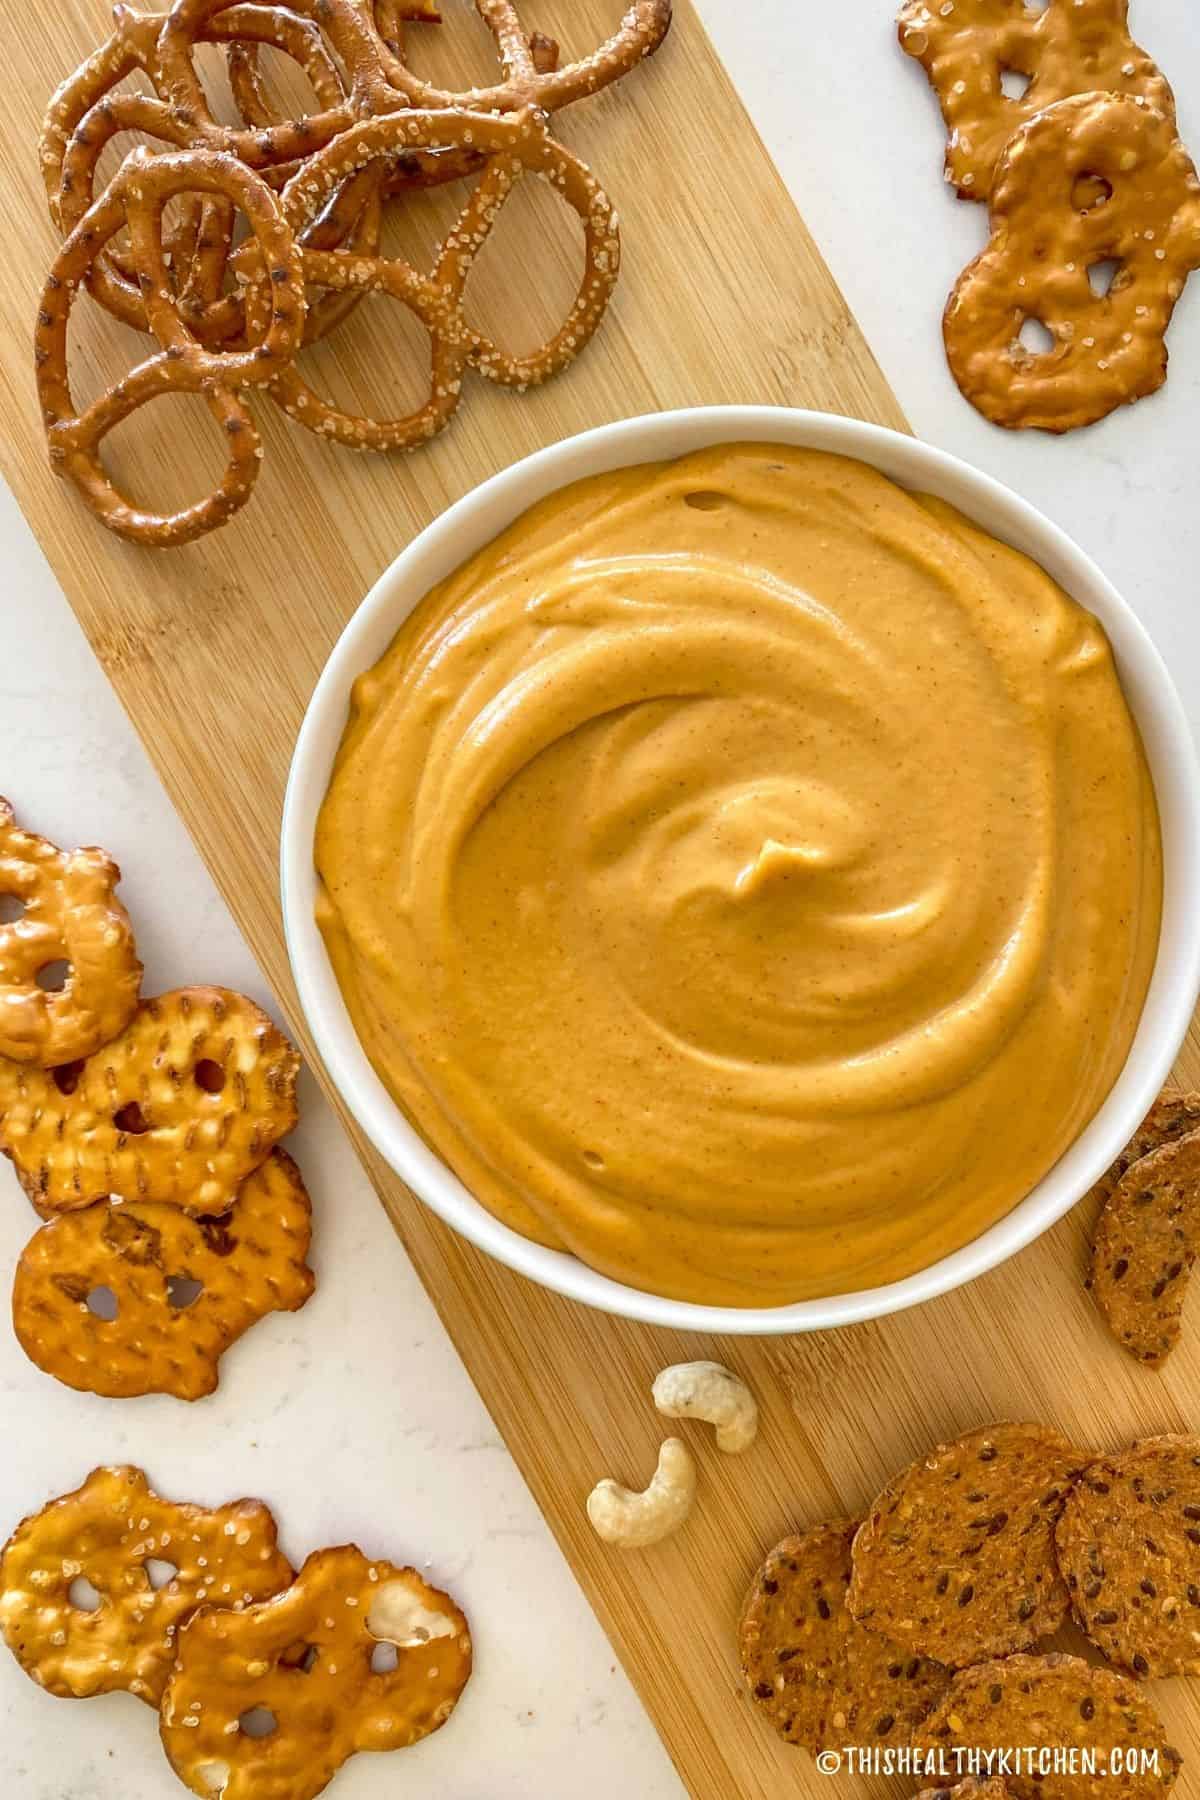 White bowl with orange dip inside and crackers and pretzels scattered around it.